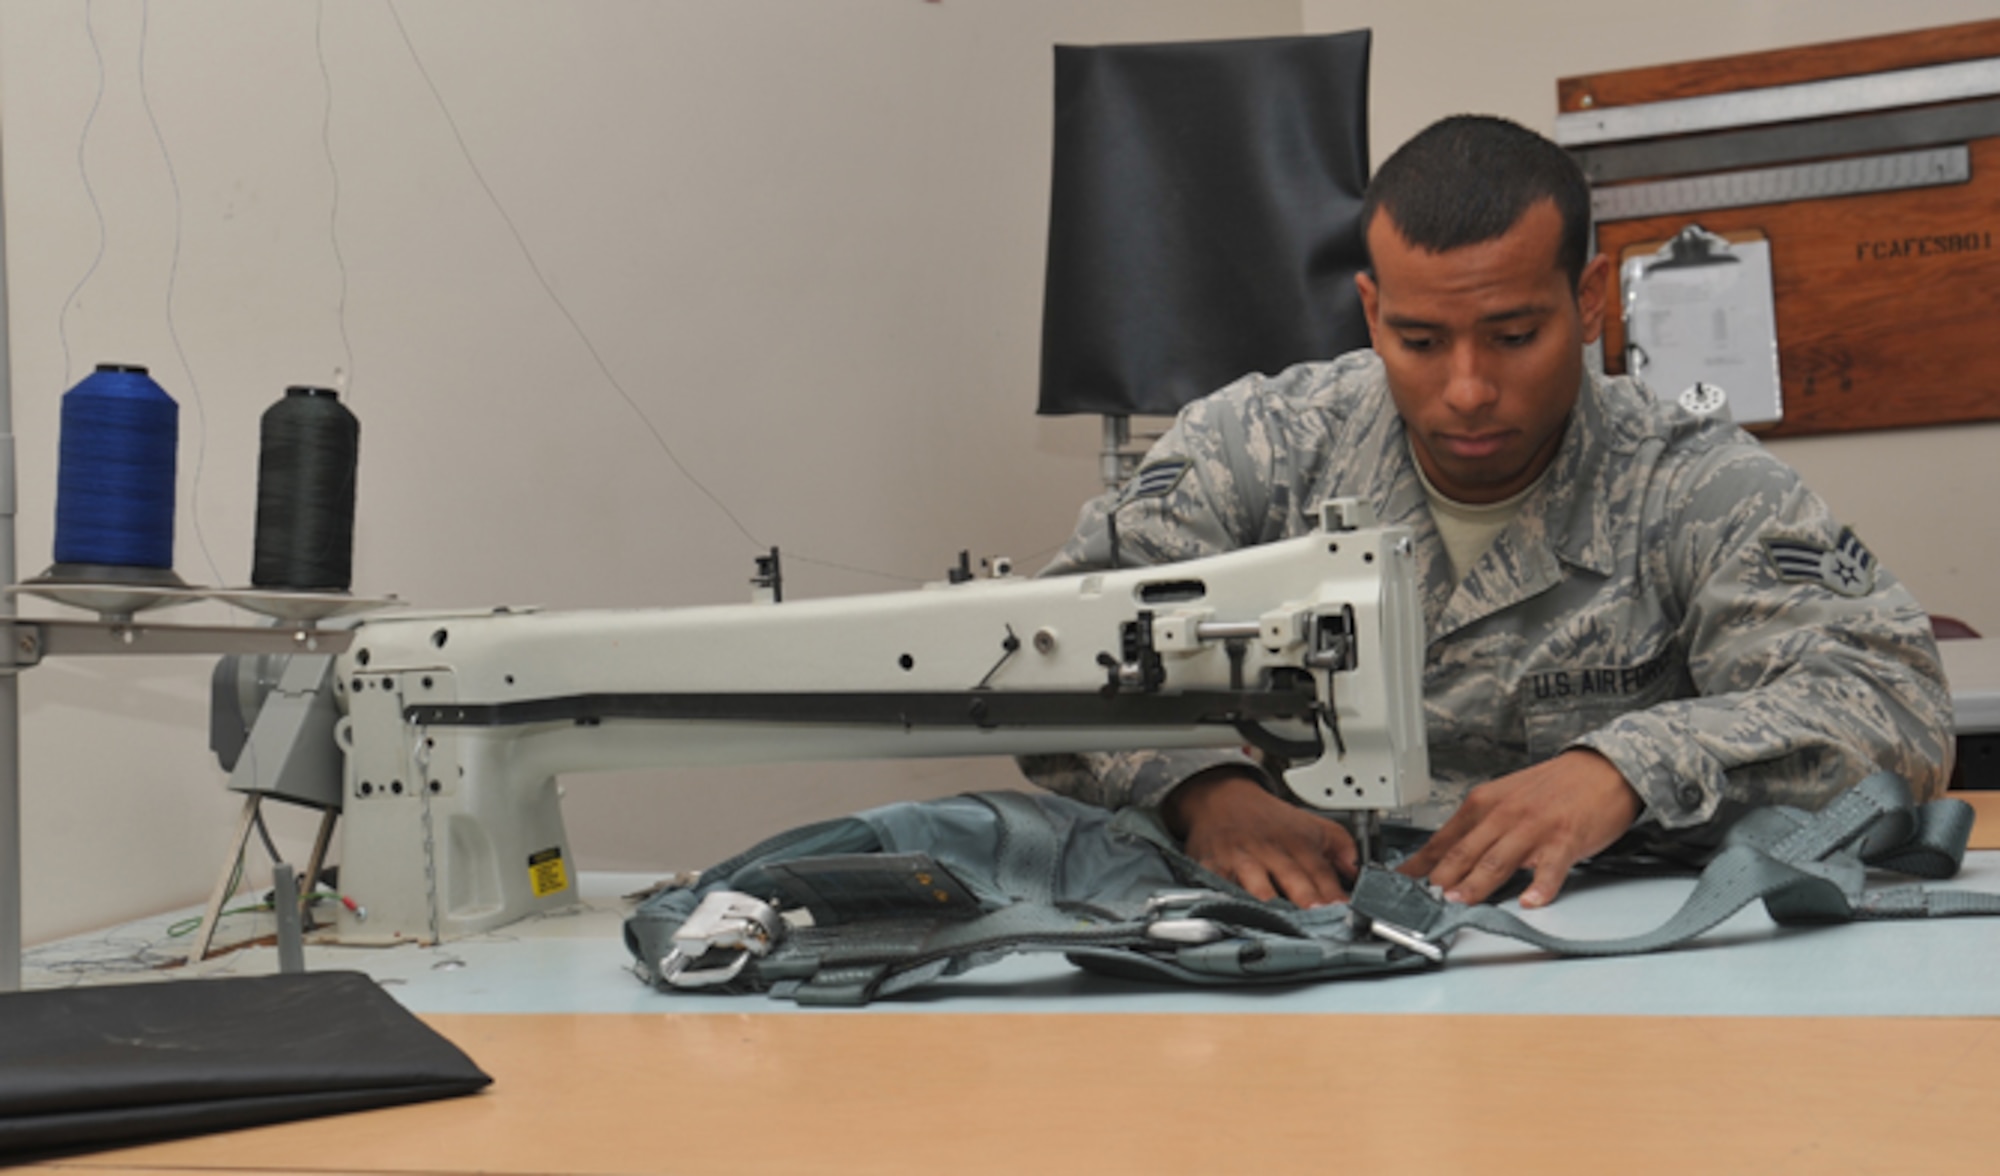 Senior Airman Kyle Boddie, 92nd Operations Support Squadron aircrew flight equipment journeyman, sews a pocket to a restraining harness July 7, 2016, at Fairchild Air Force Base, Wash. The restraining harness is used to attach an aircrew member to the jet in case of an emergency. As an aircrew flight equipment journeyman, Boddie fixes restraining harnesses, packs and inspects escape slides, 20-man life rafts, infant cots, adult and child life jackets, HGU 55/P pilot helmets and MBU 20/P 12/P oxygen breathing masks. (U.S. Air Force photo/Staff Sgt. Samantha Krolikowski)